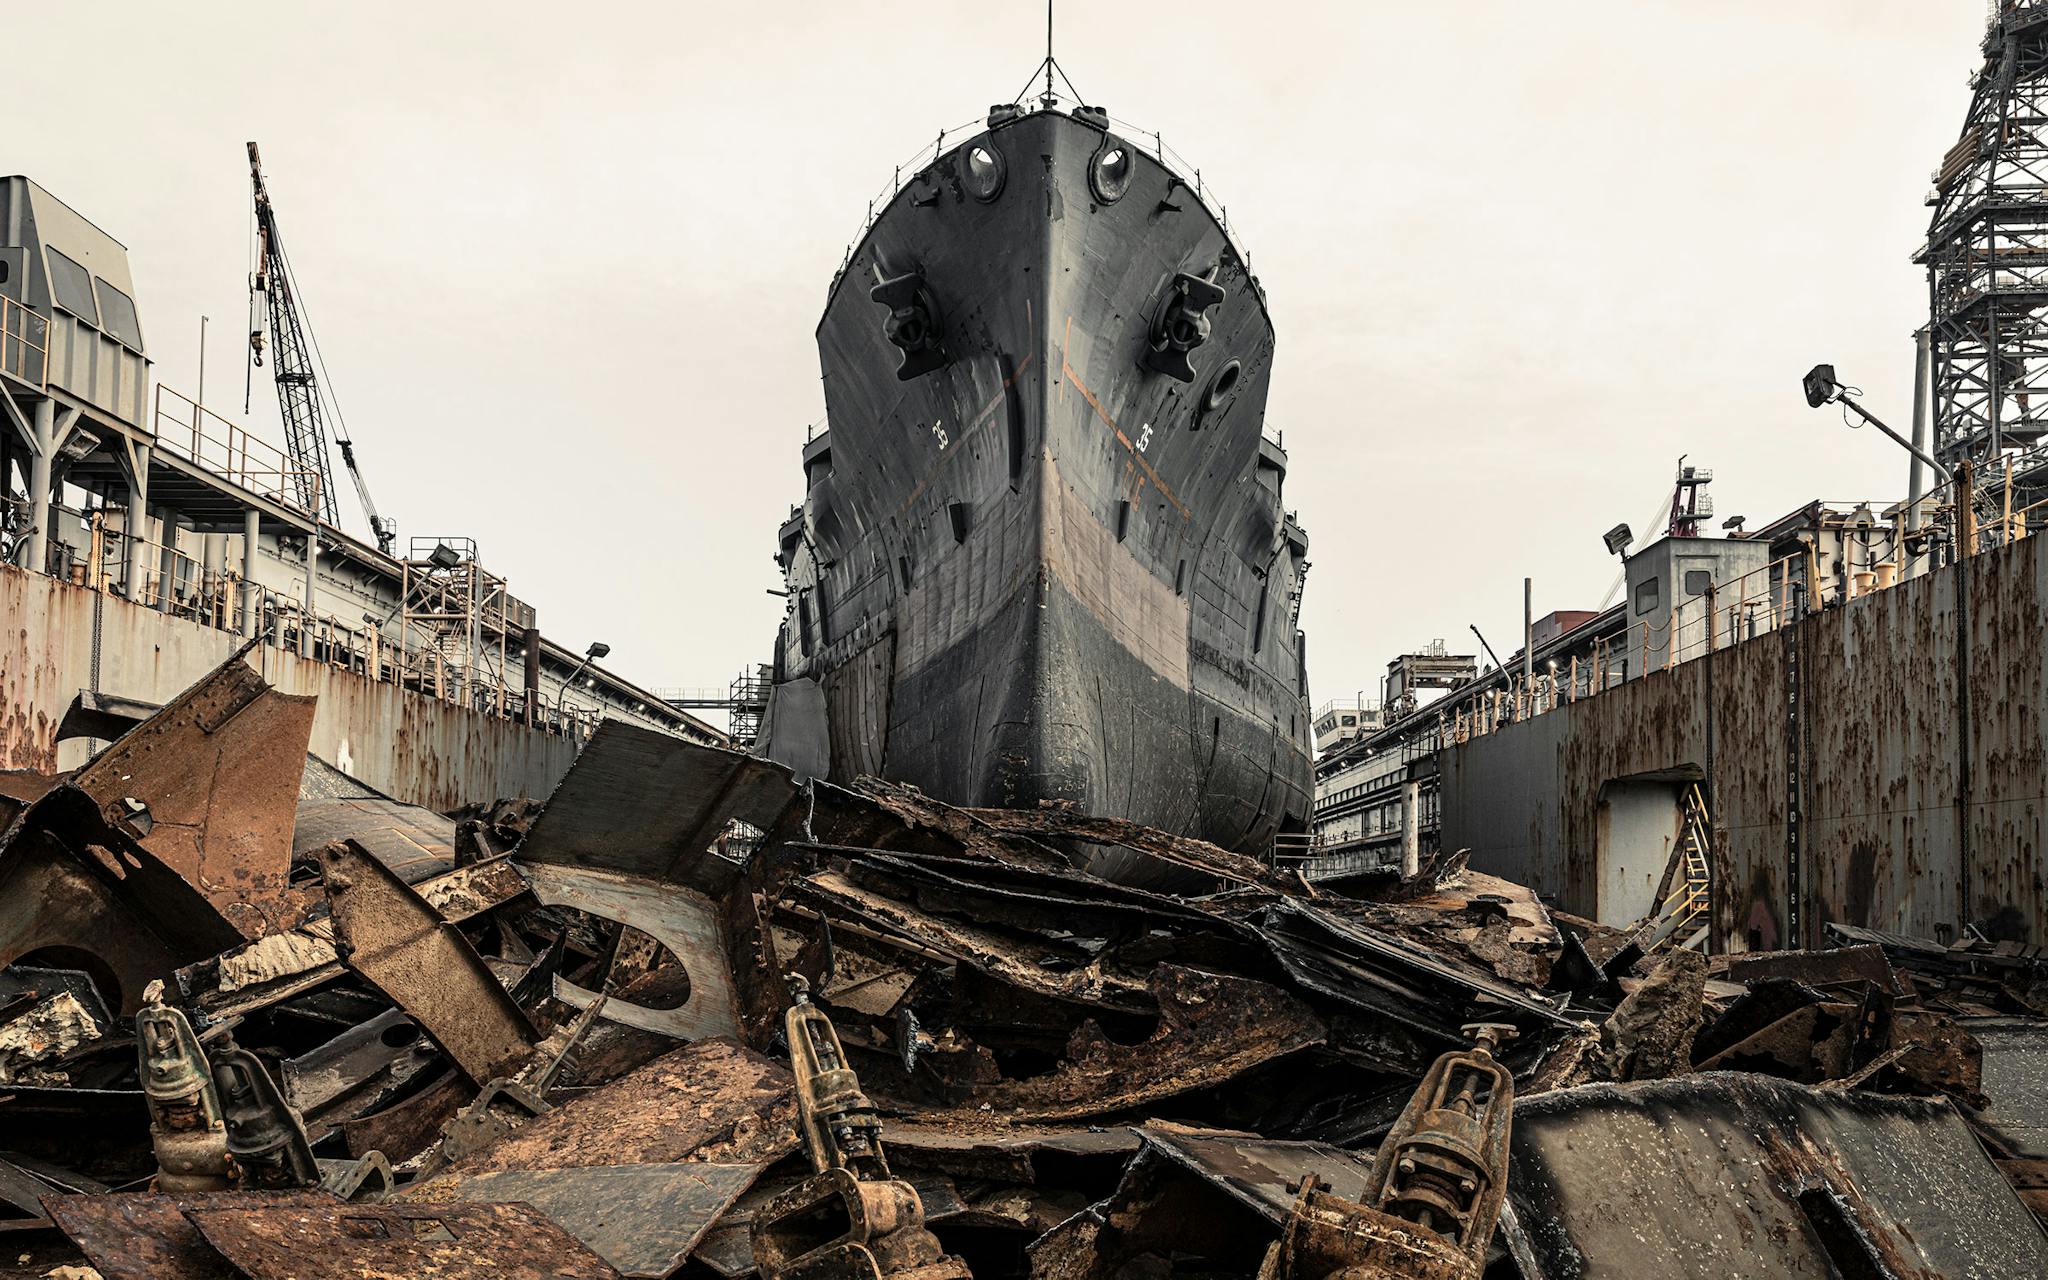 The USS Texas in dry dock earlier this year at the Gulf Copper shipyard, in Galveston. In the foreground are remnants of the ship’s torpedo blisters, first installed in 1925. At the bottom of the photo are the valves that were used to flood these tanks. Each side of the hull was at one time covered with 21 blisters, though they were all scrapped. New blisters are being built at the shipyard.